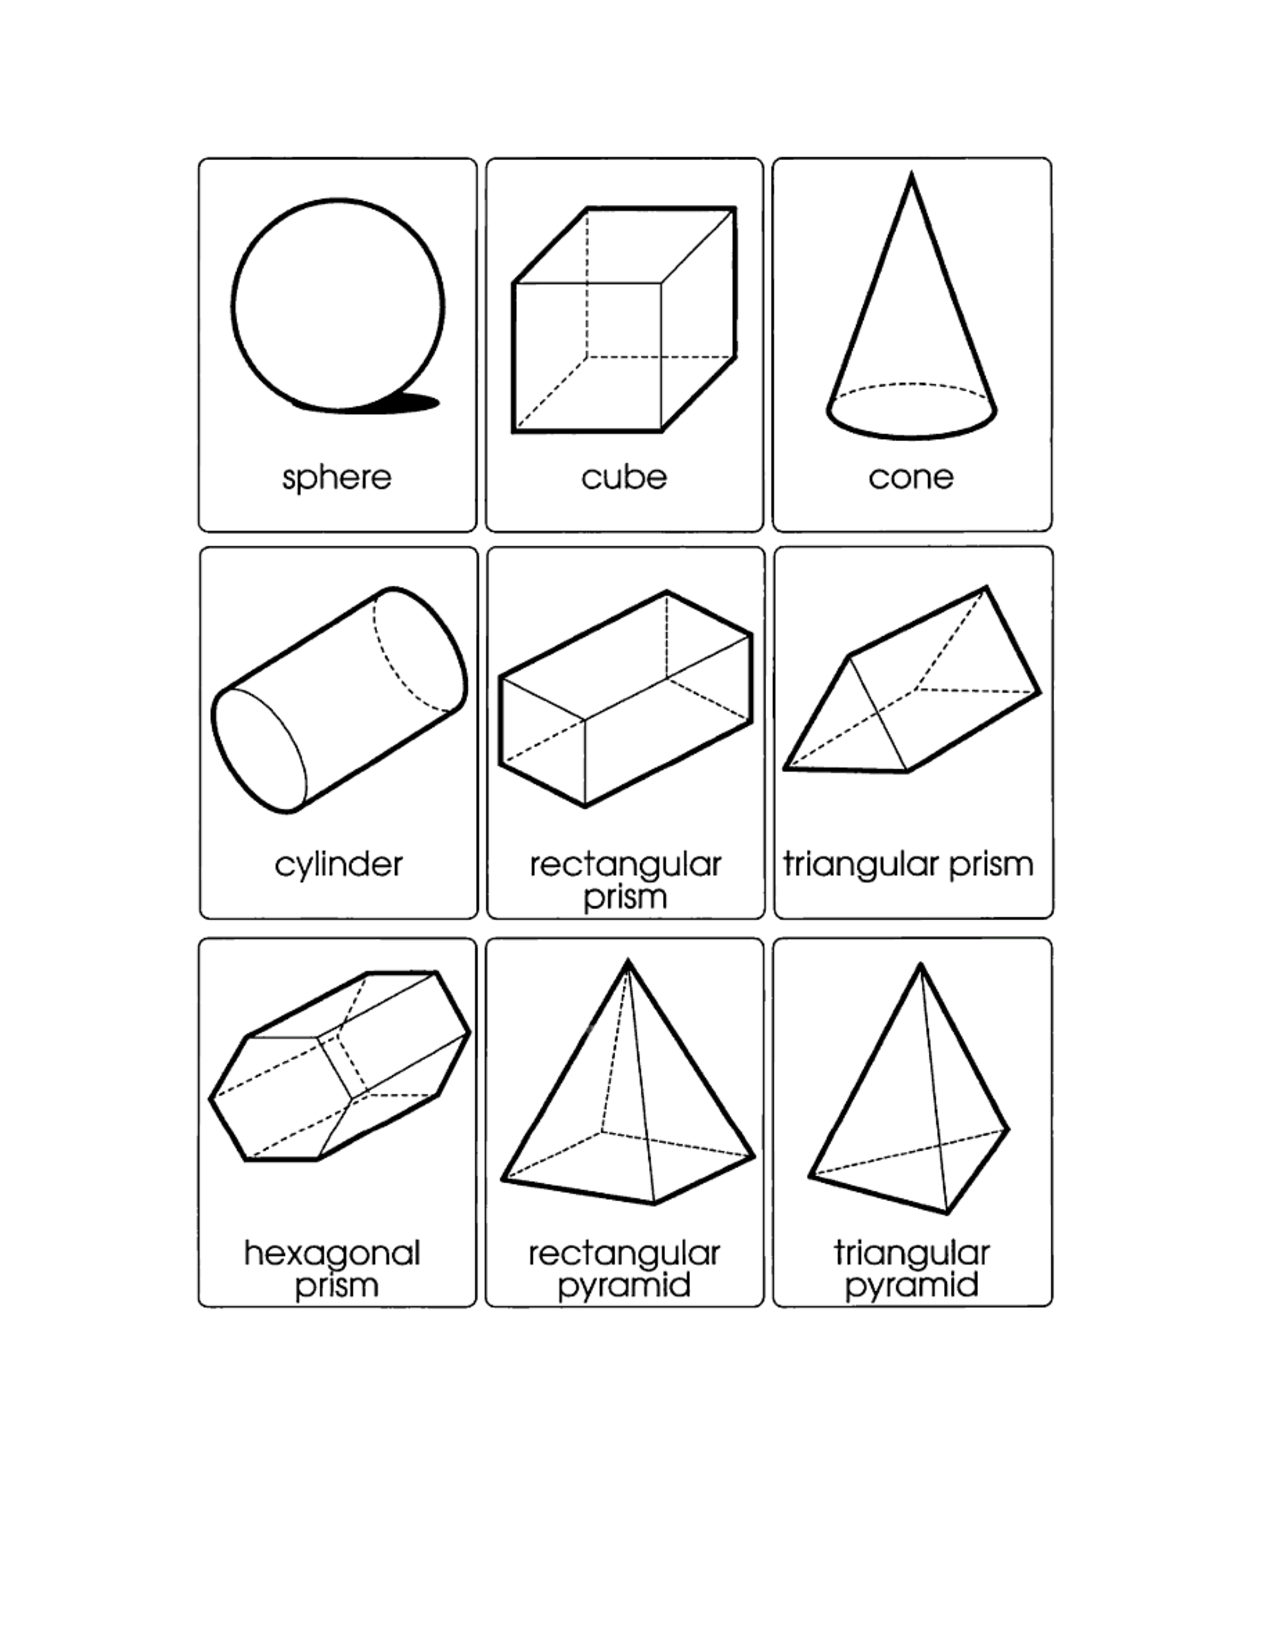 printable-template-shapes2